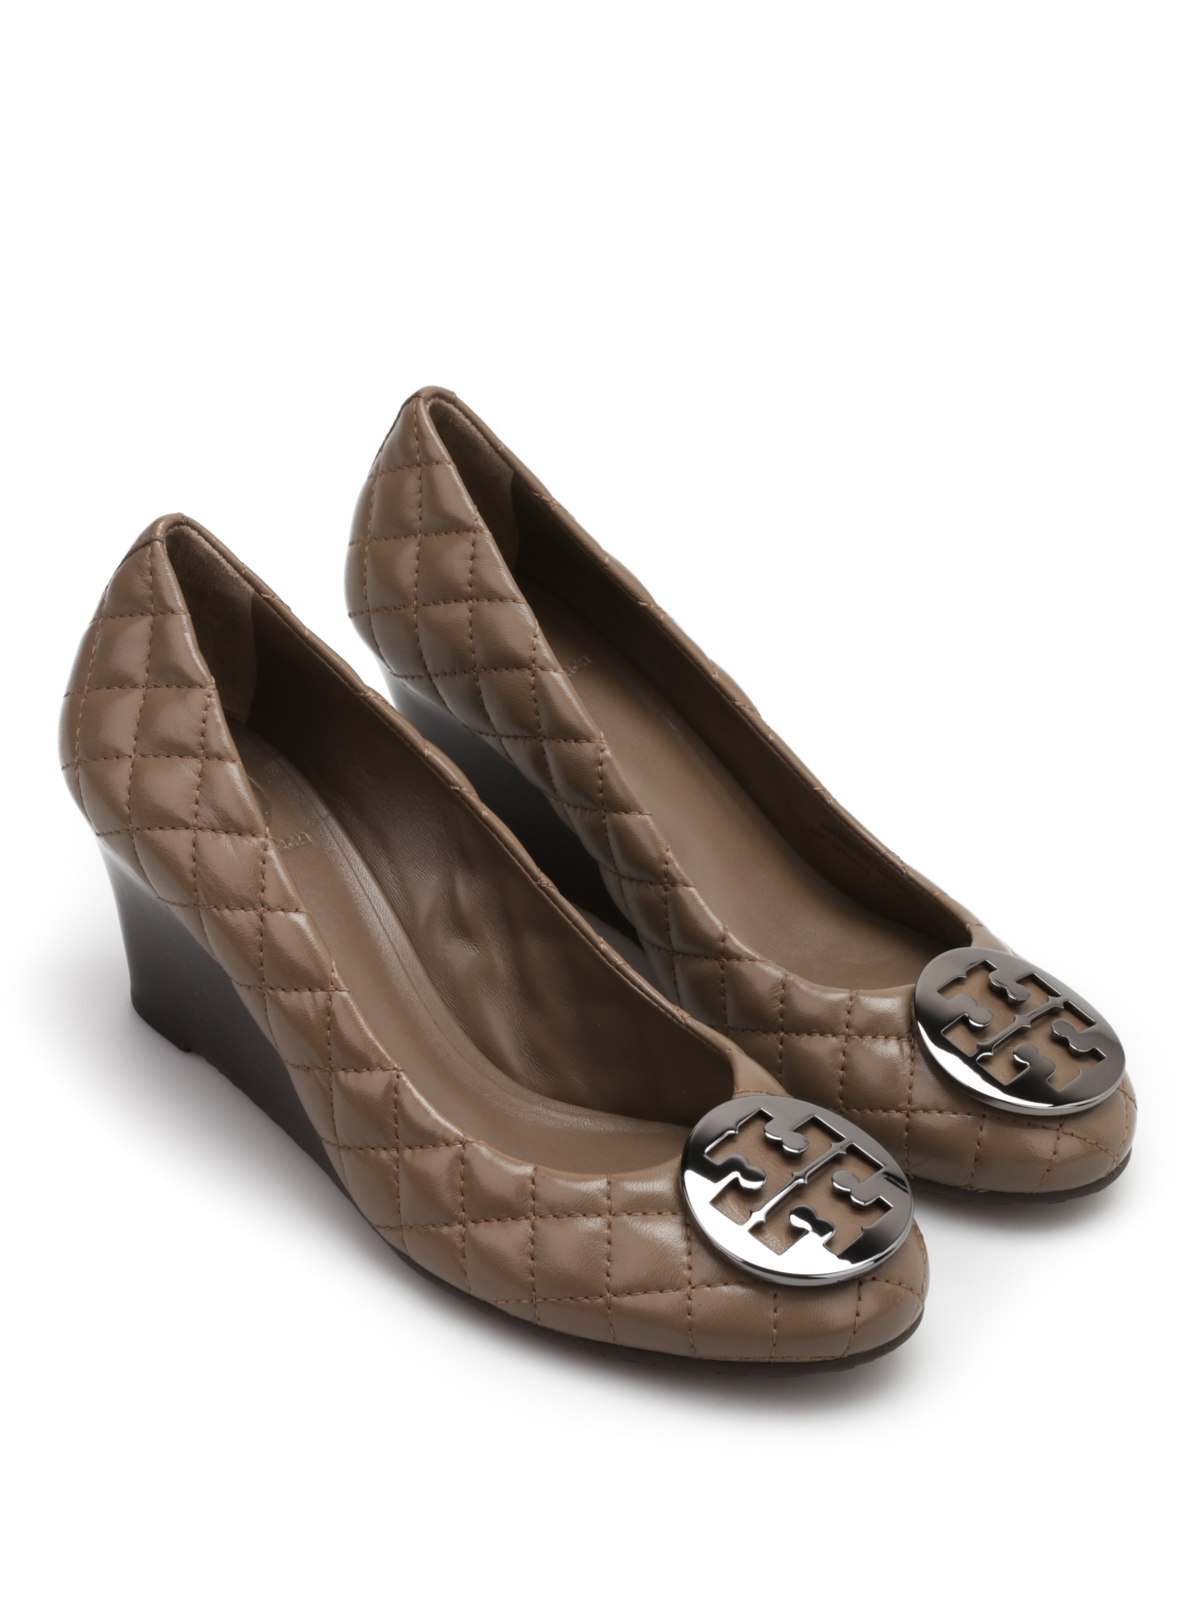 Court shoes Tory Burch - Quinn quilted wedge - 32158774884 